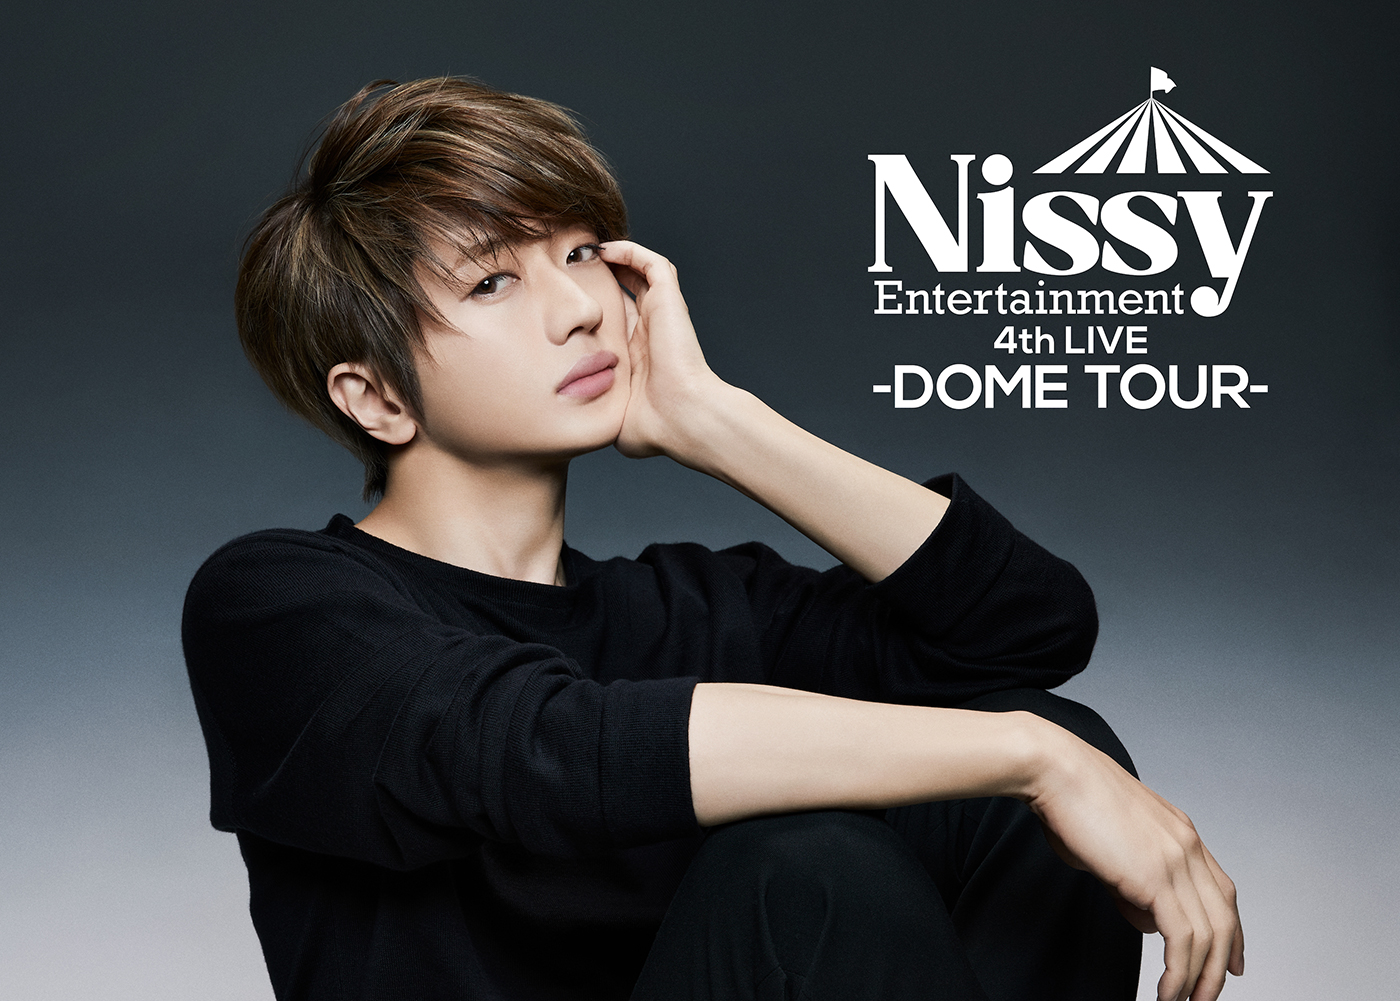 Nissy Entertainment 4th LIVE-DOME TOUR-Nissy - ミュージック